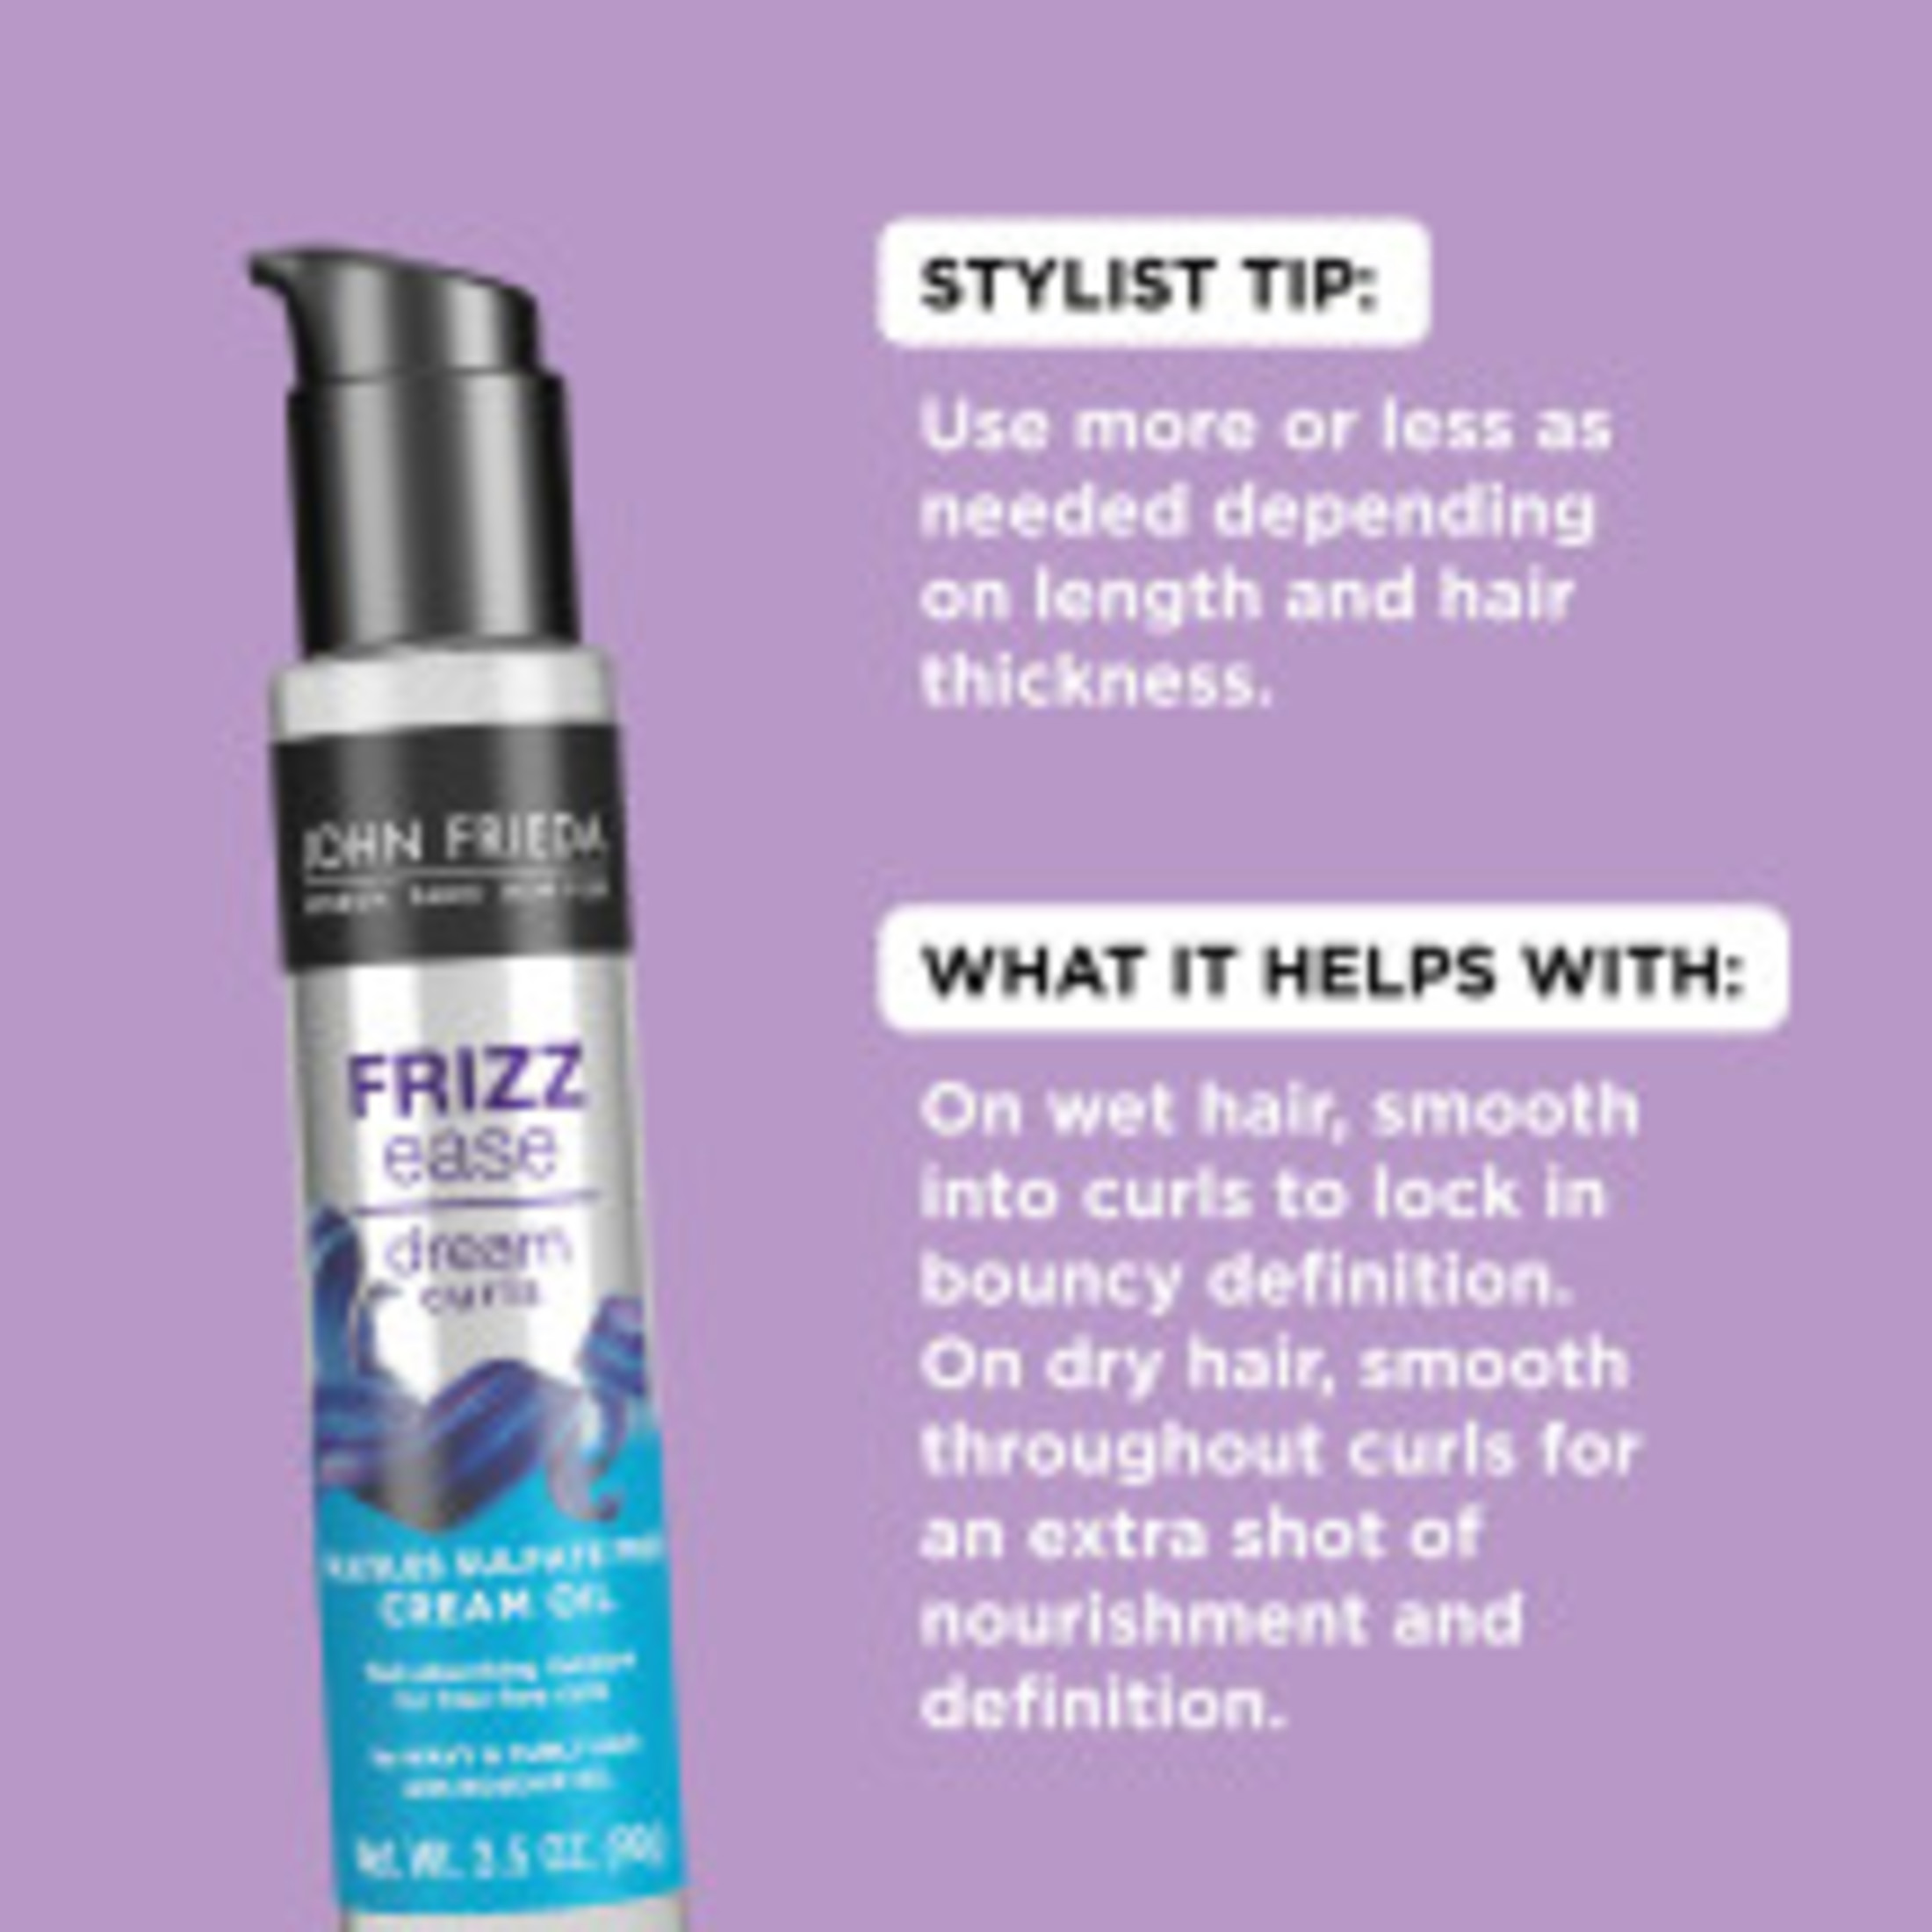 John Frieda Anti Frizz, Frizz Ease Dream Curls with Rosehip Oil, SLS/SLES Sulfate Free Cremé Oil, 3.5 fl oz - image 3 of 7